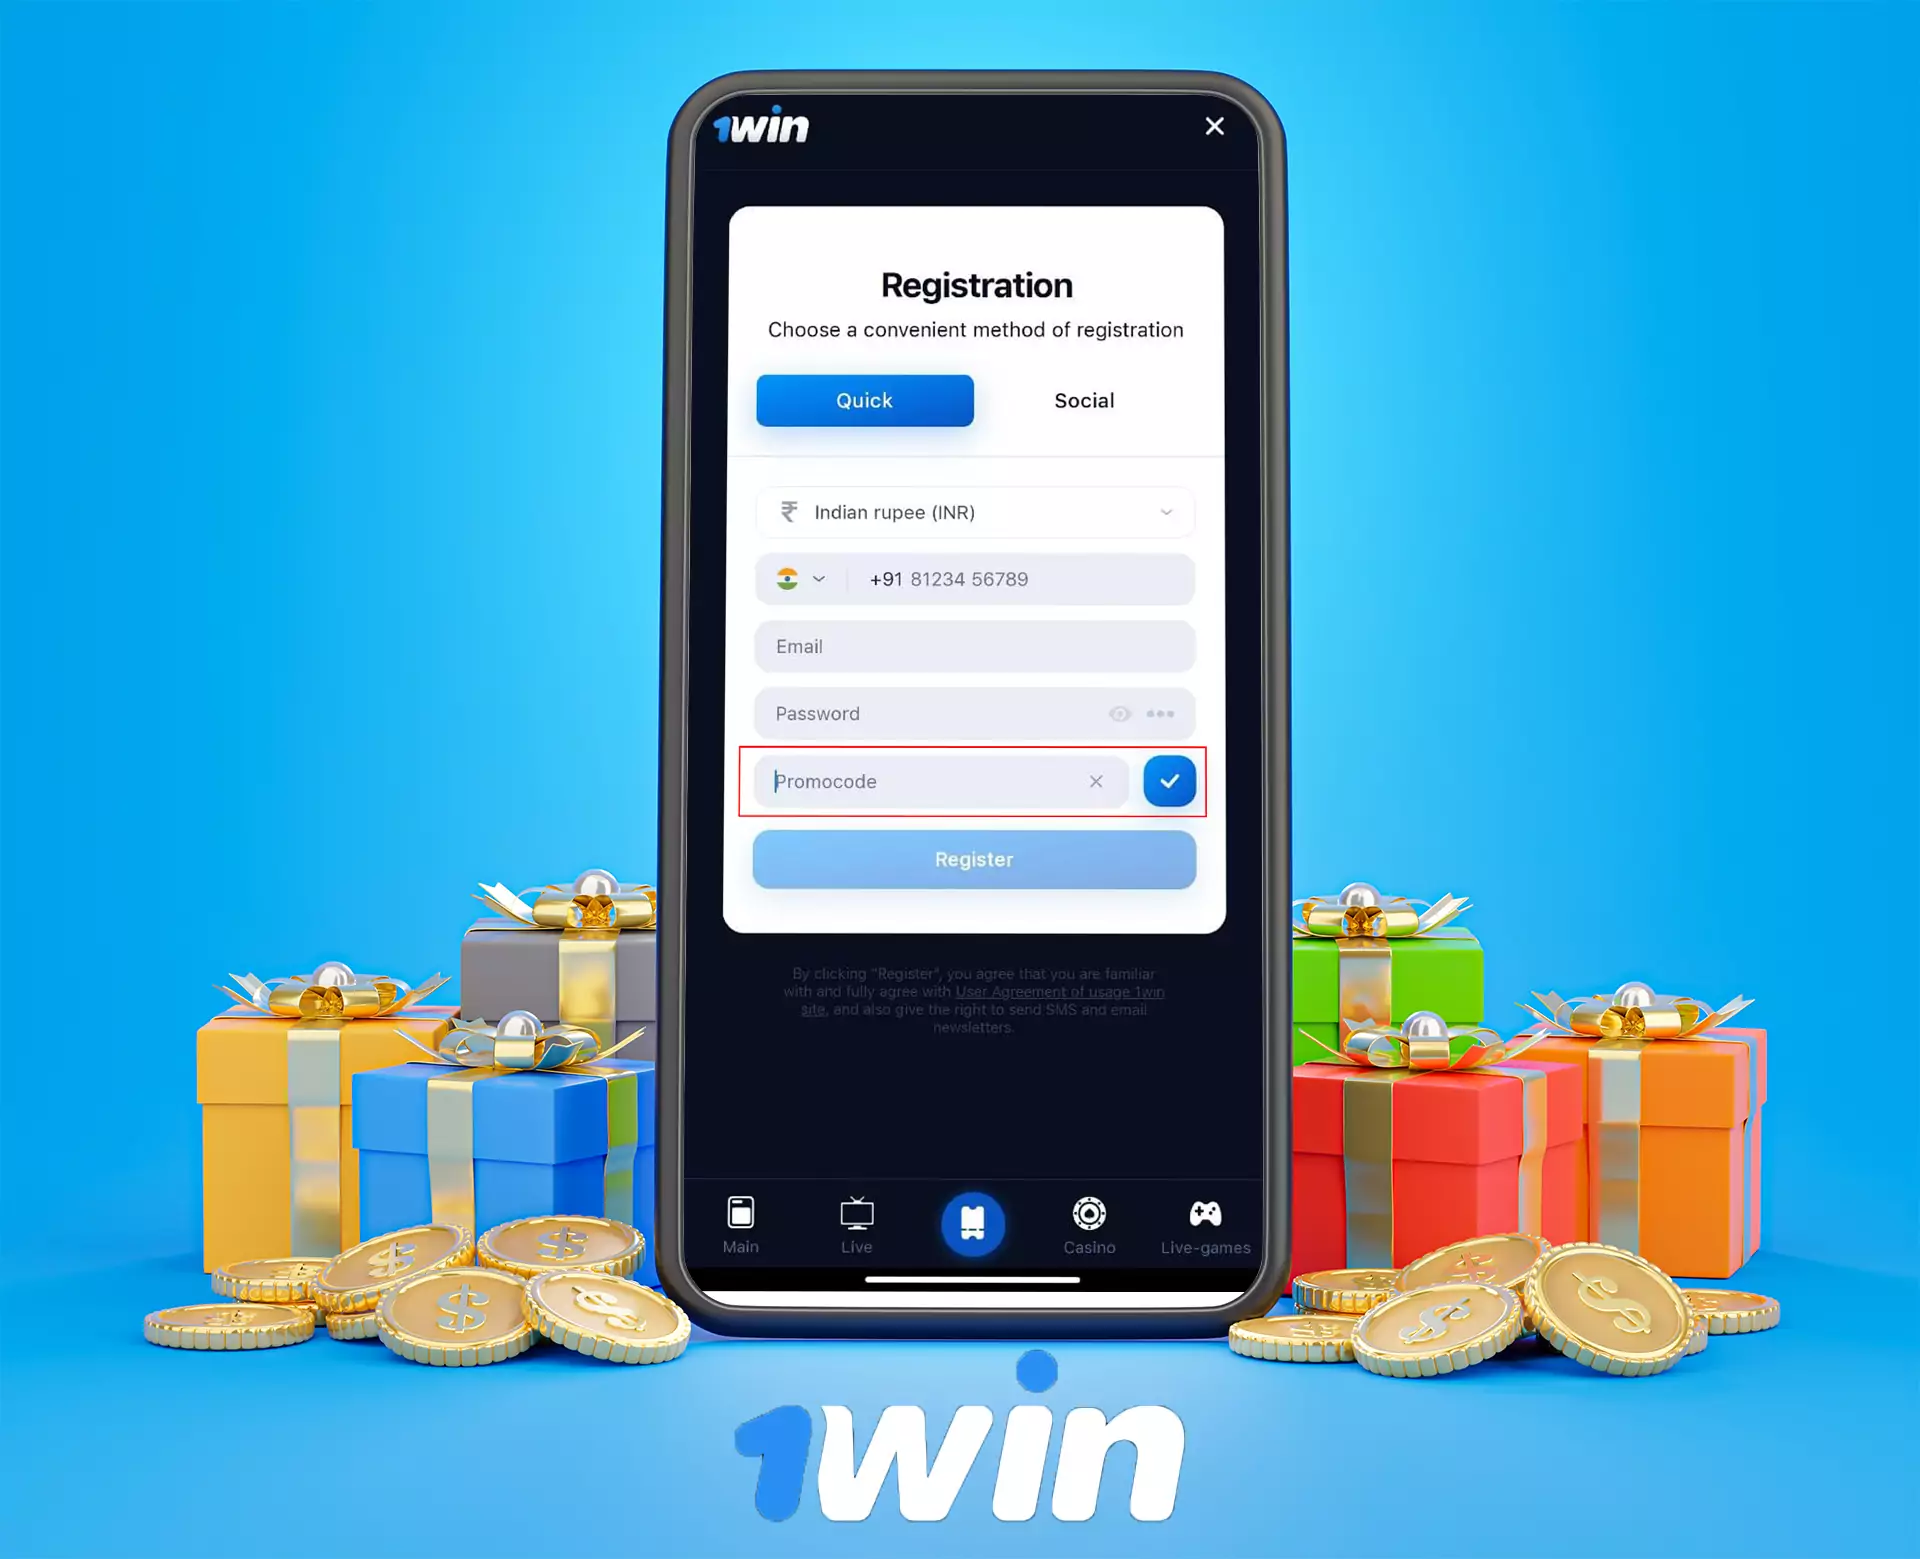 To activate the bonus you only need to enter a promo code during registration proccess at 1win app.